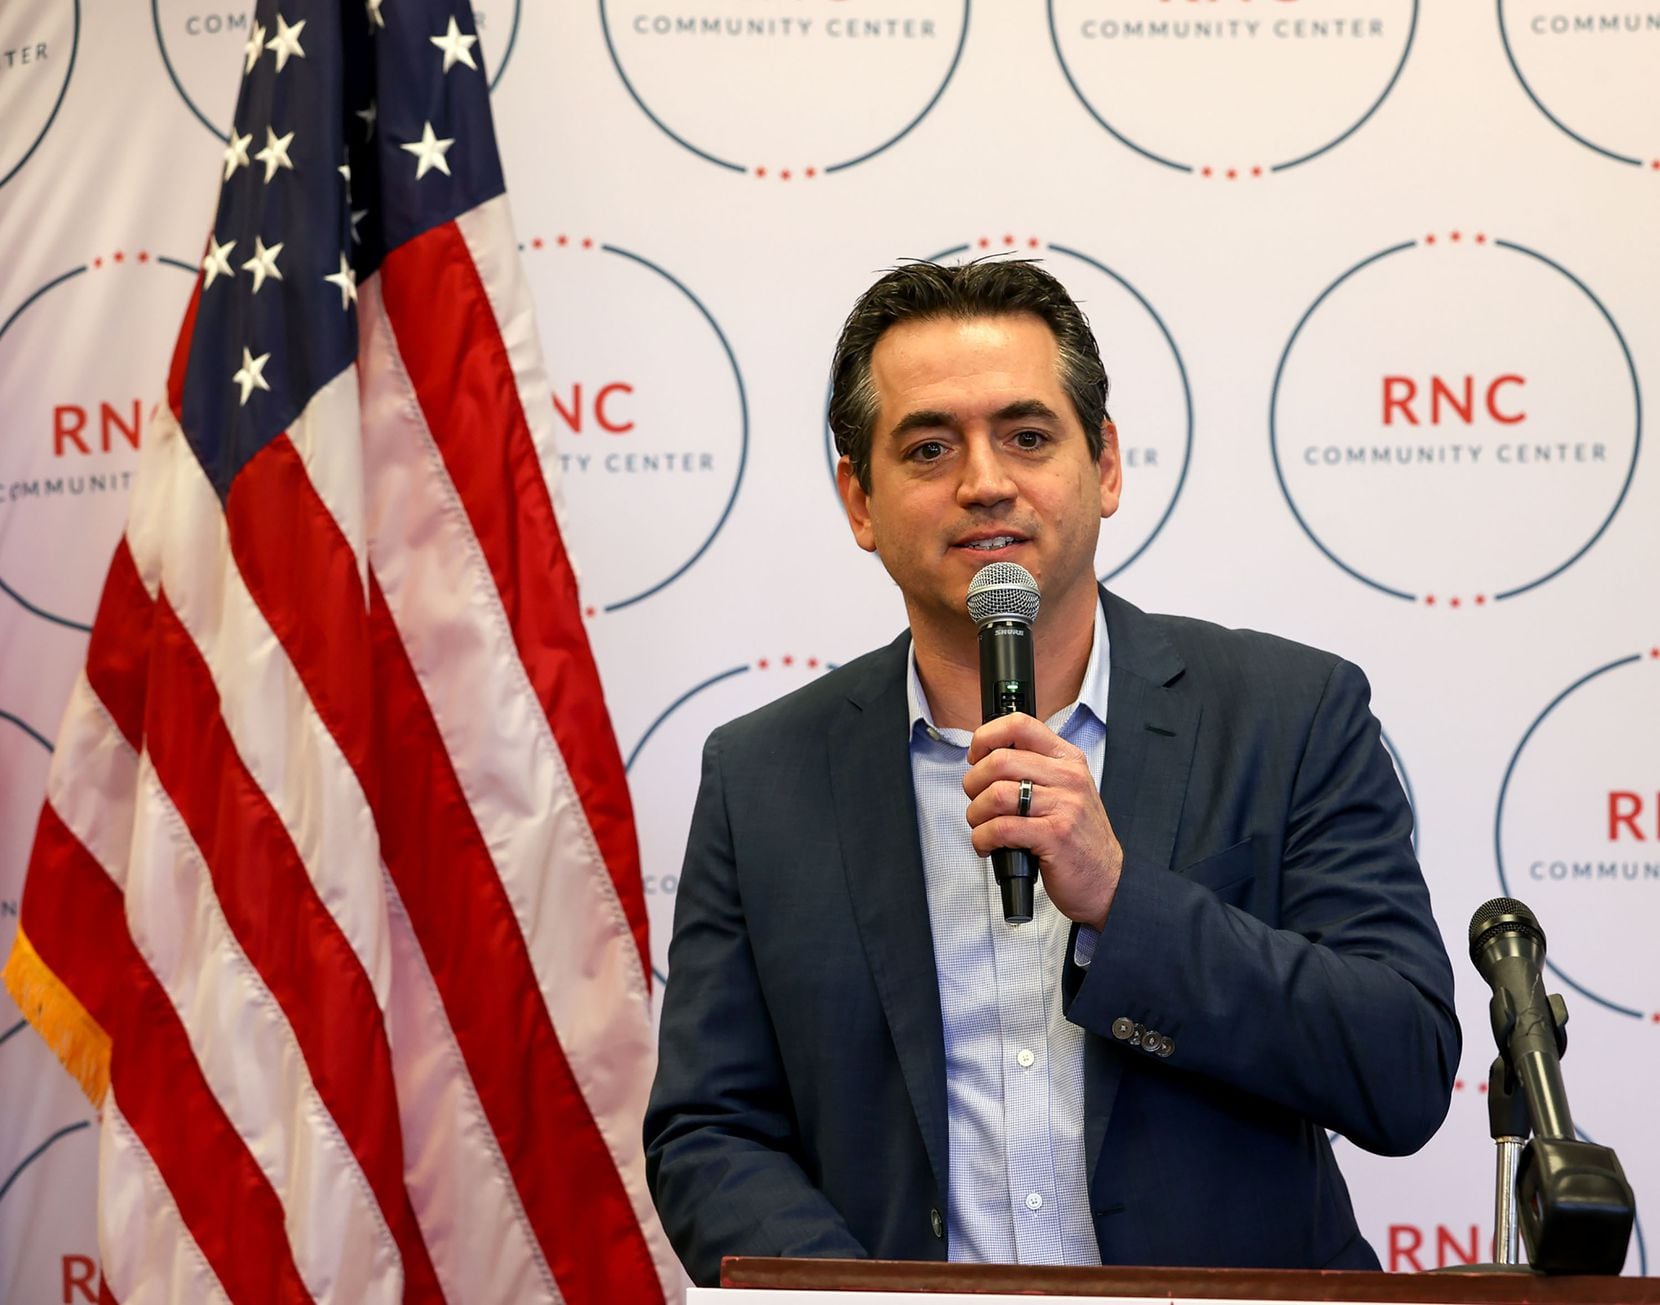 The Republican National Committee opens a community center in the Dallas area.  Matt...